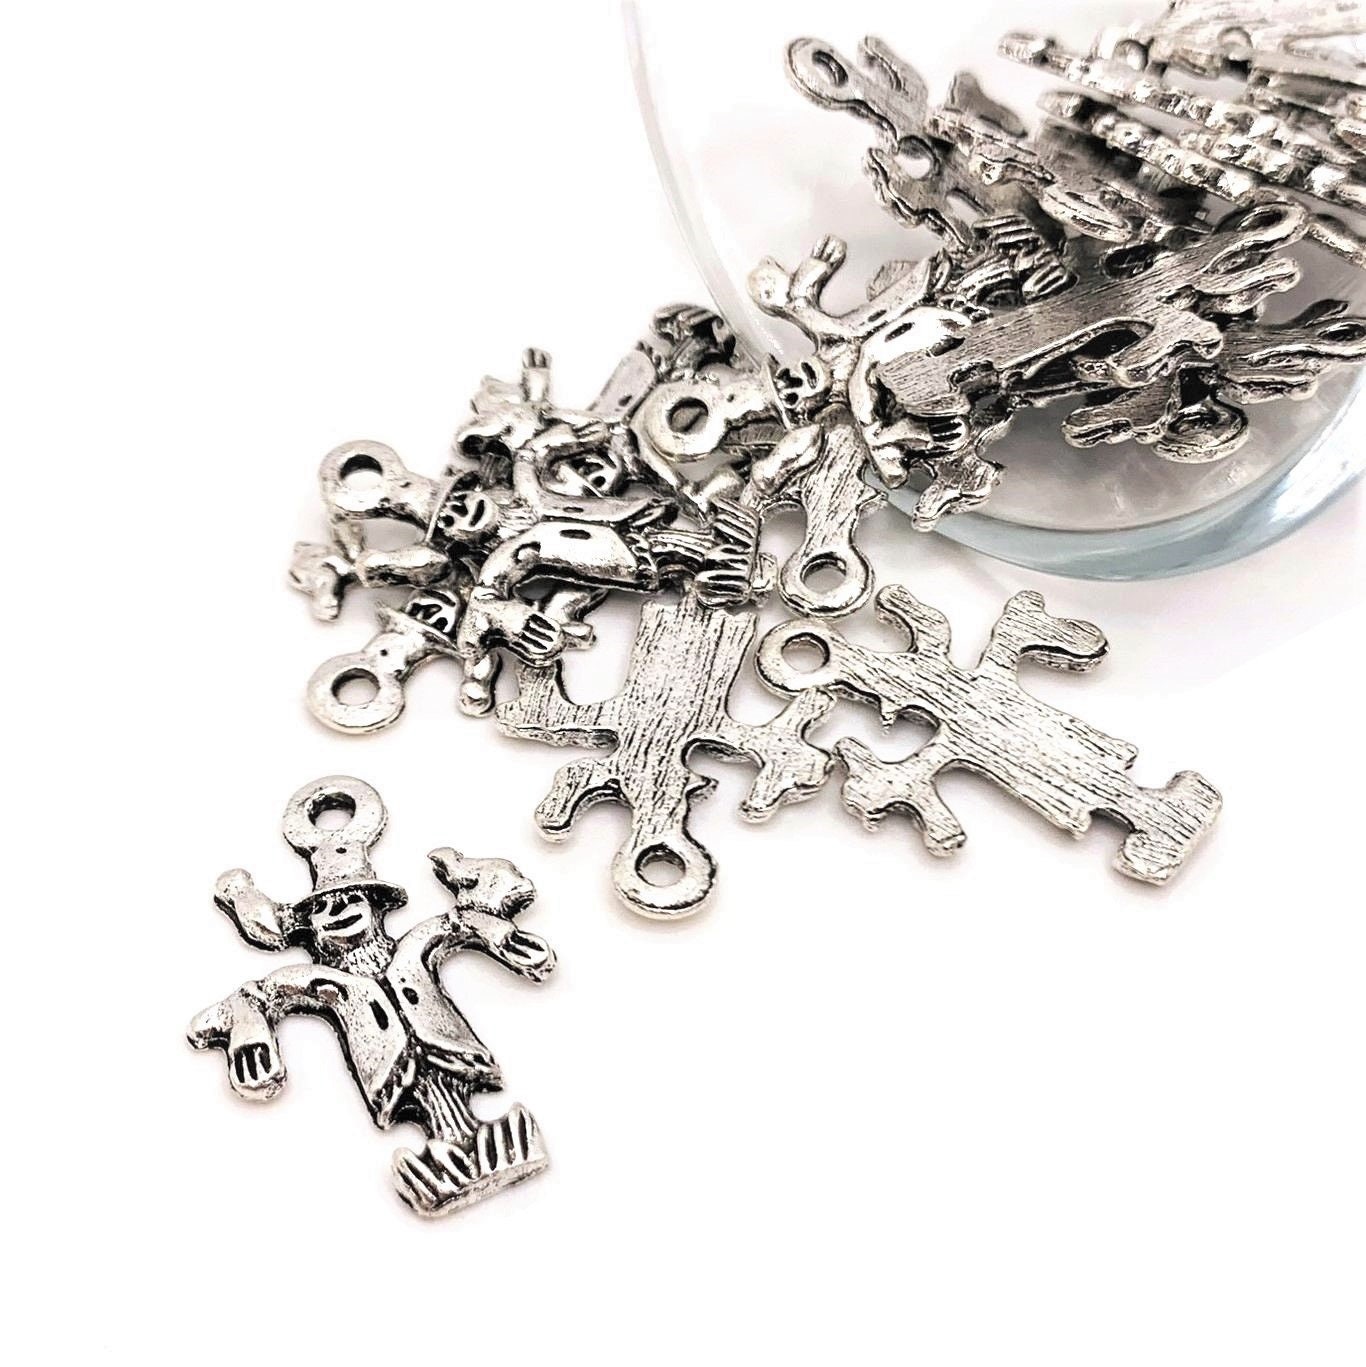 4, 20 or 50 BULK Silver Scarecrow Charms, Wizard of Oz, Fall Halloween Charm  Ships Immediately From USA AS172 